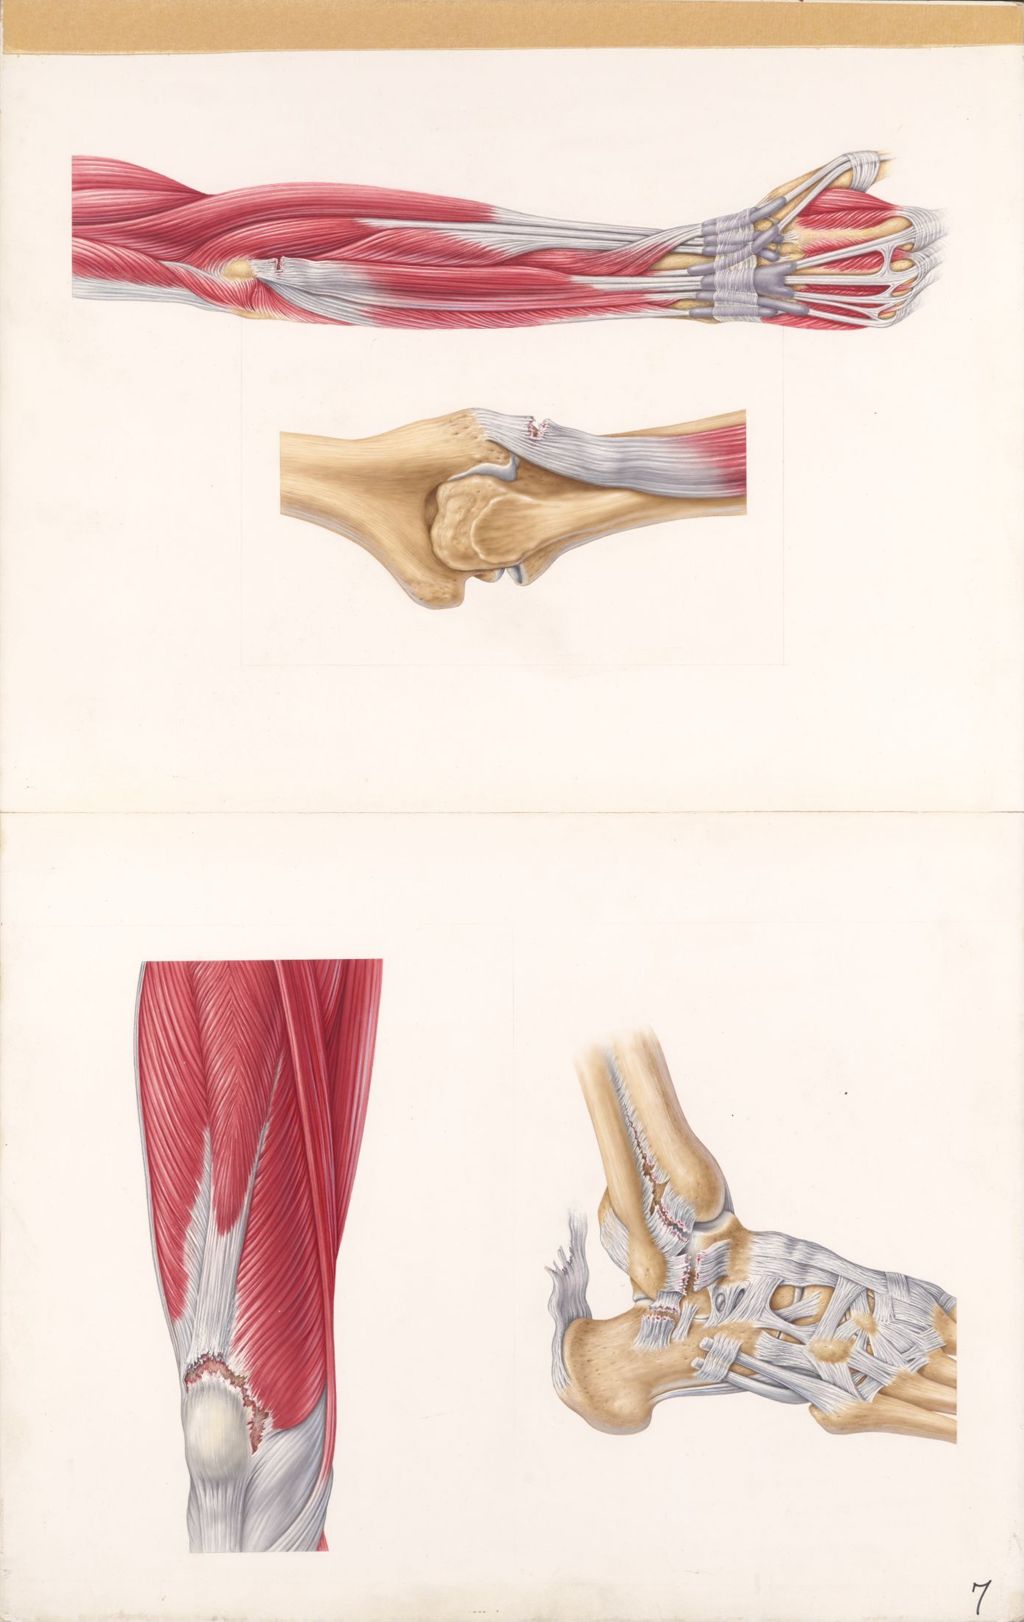 Medical Profiles, Decadron Phosphate with Xylocaine, Sites and appearances of some musculoskeletal disorders, Plate II